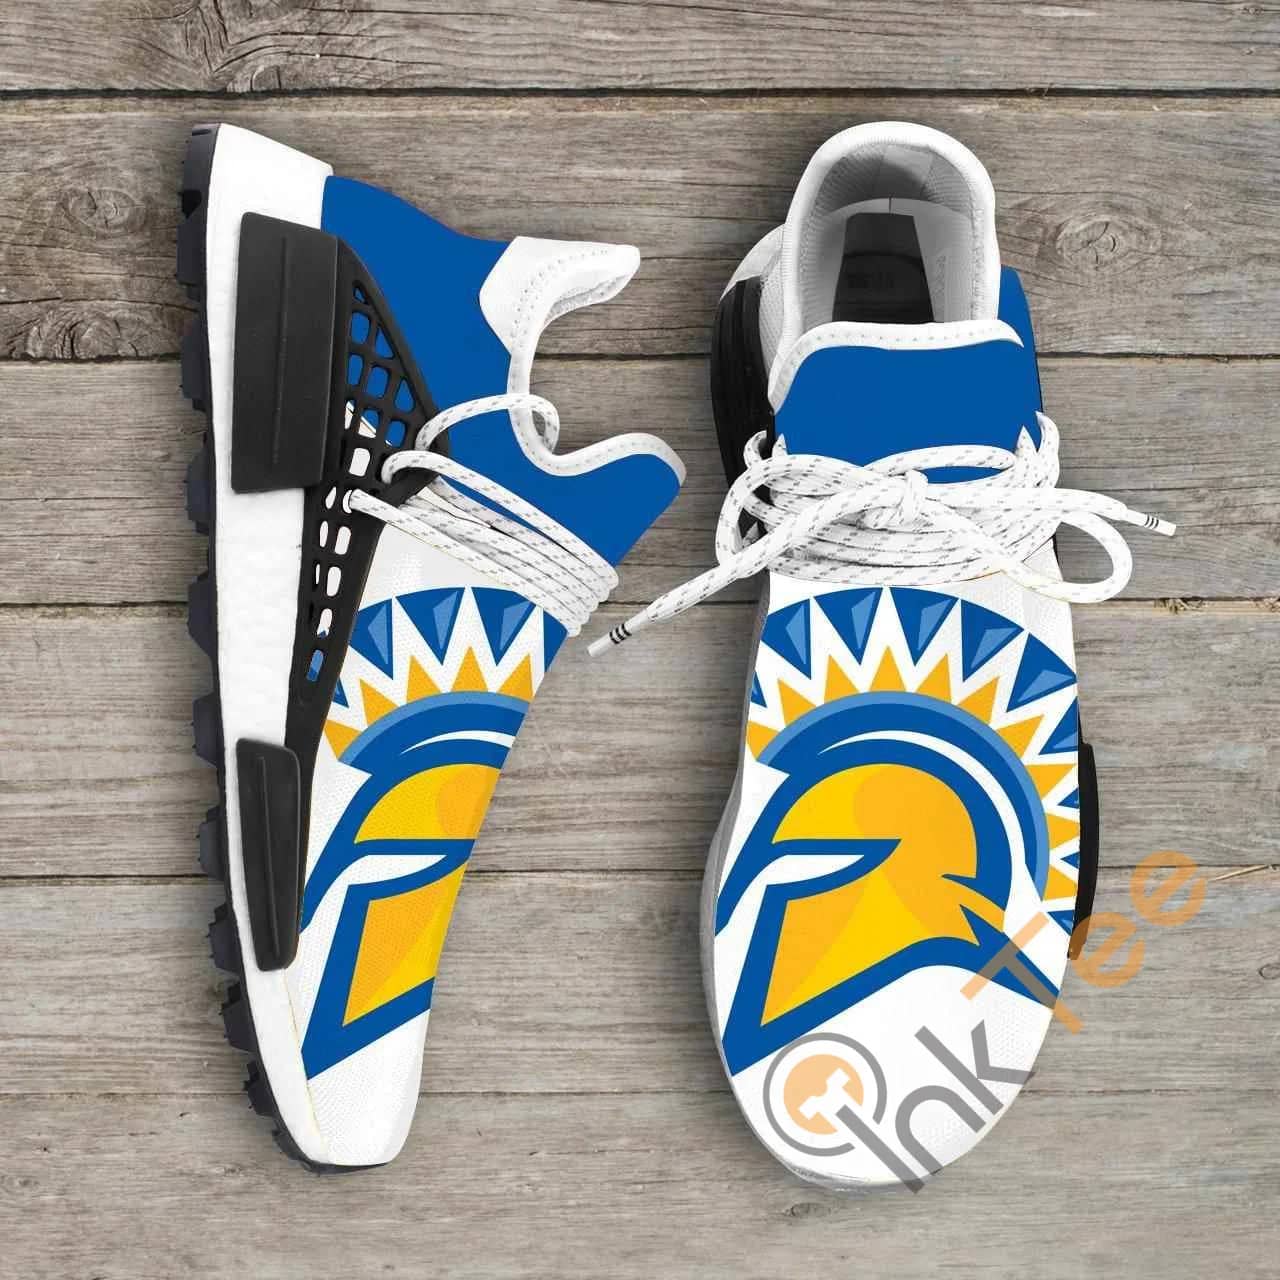 San Jose State Spartans Ncaa NMD Human Shoes